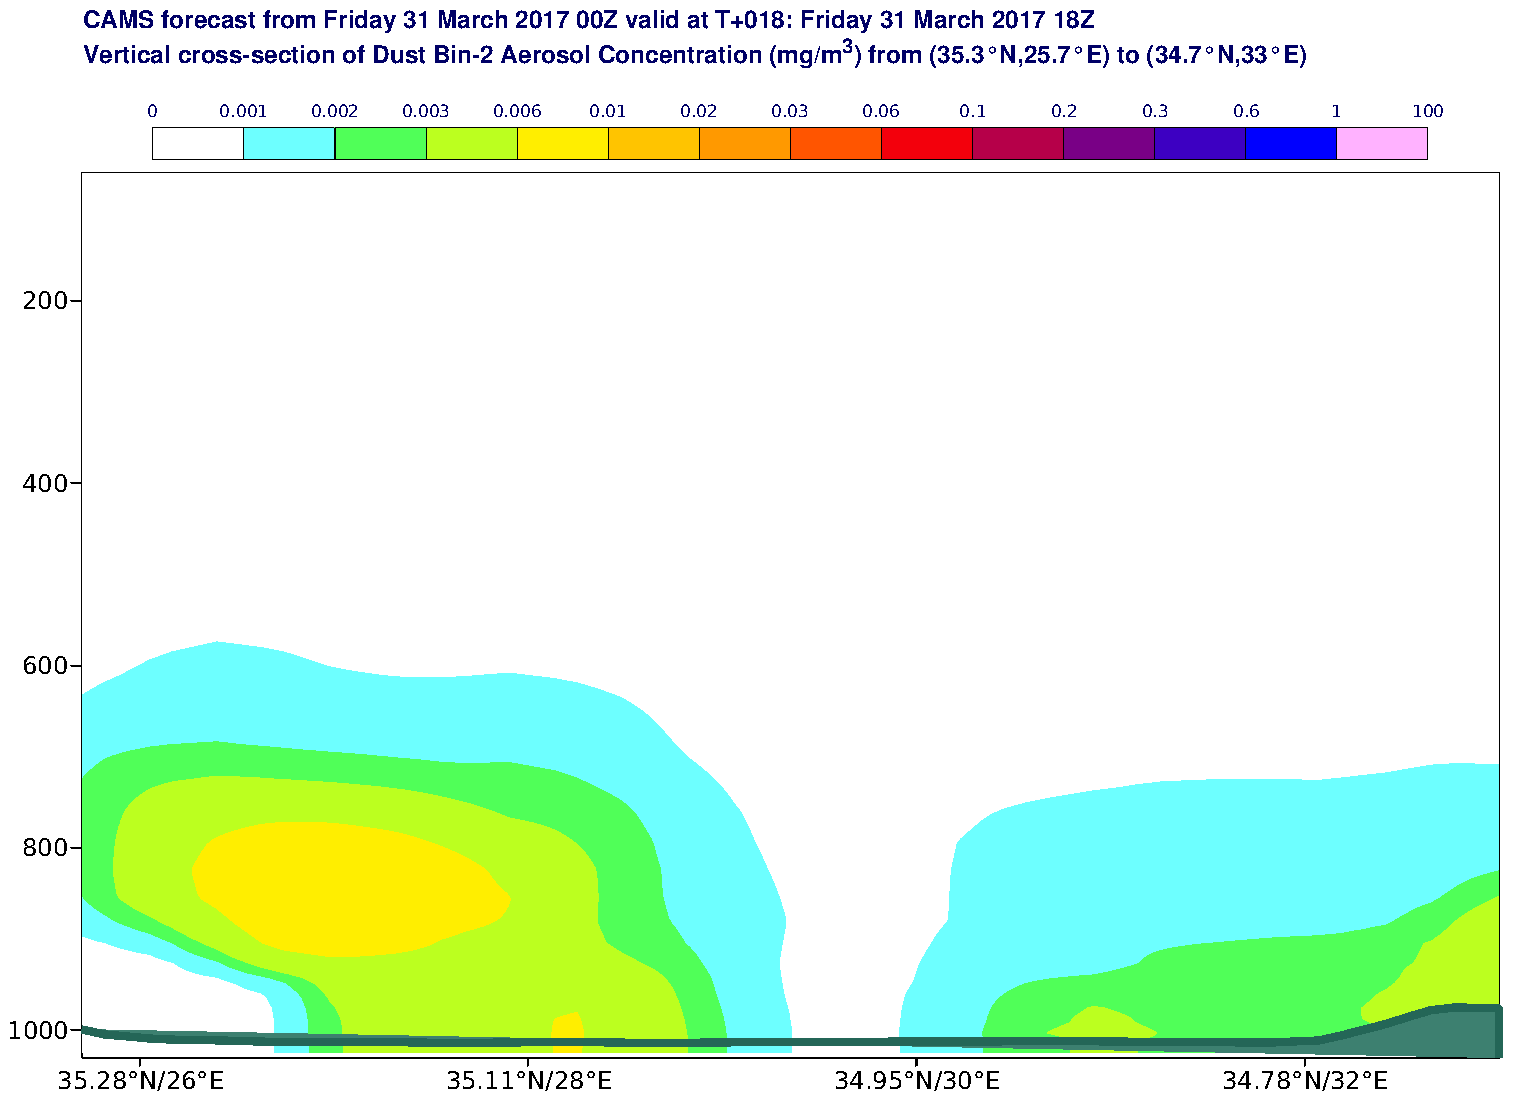 Vertical cross-section of Dust Bin-2 Aerosol Concentration (mg/m3) valid at T18 - 2017-03-31 18:00